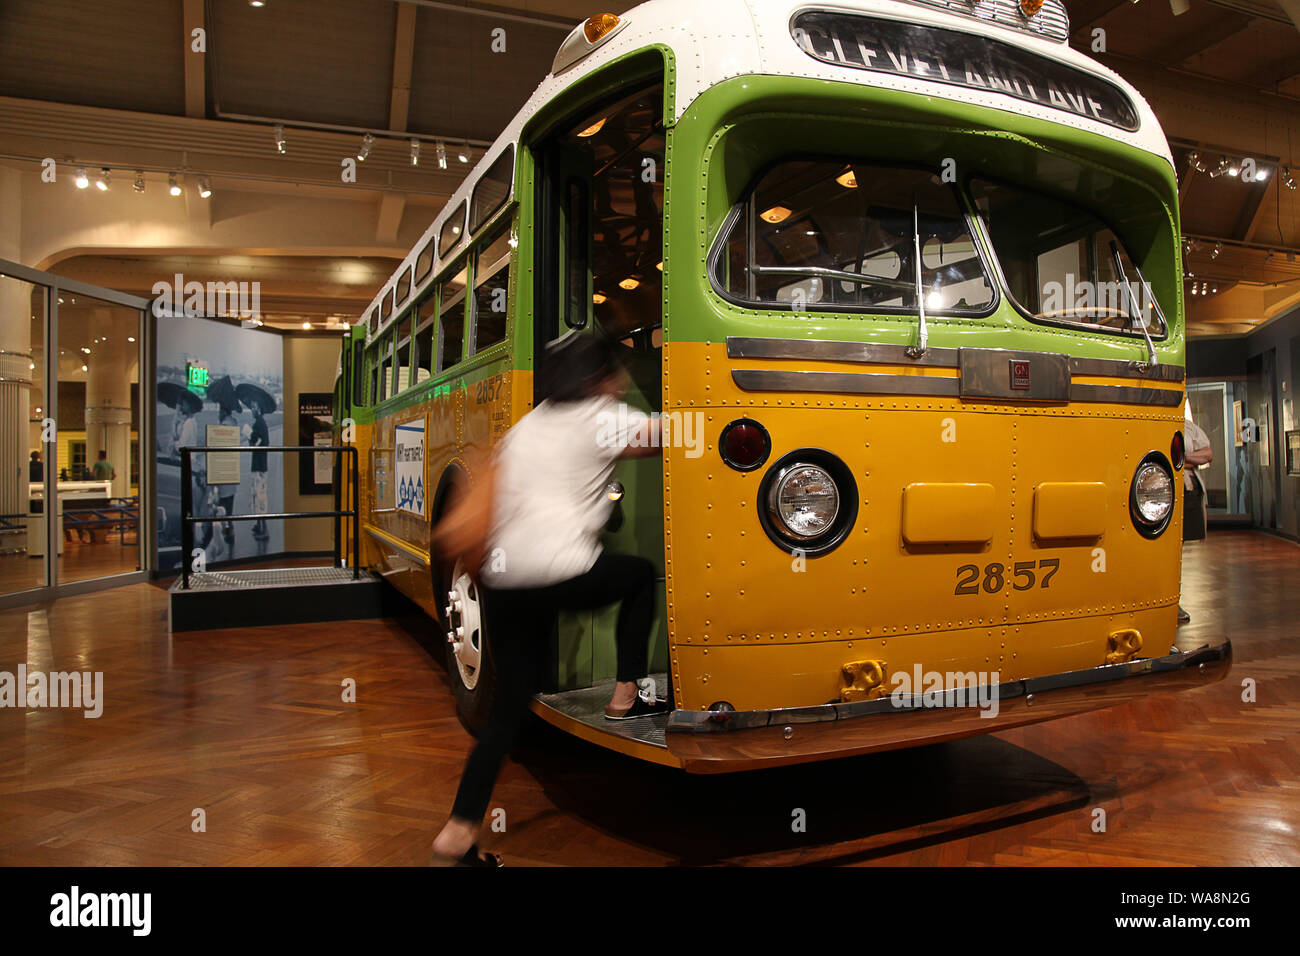 August 16, 2019, Detroit, Michigan, United States: Aug 16, 2019,  Dearborn, Michigan, United States;  The Henry Ford Museum includes exhibits rsuch as the bus that Rosa Parks was riding when she refused to give up her seat and started the civil rights movement with the Montgomery, Alabama bus boycott which is restored and on display at the museum in Dearborn, Michigan. (Credit Image: © Ralph Lauer/ZUMA Wire) Stock Photo